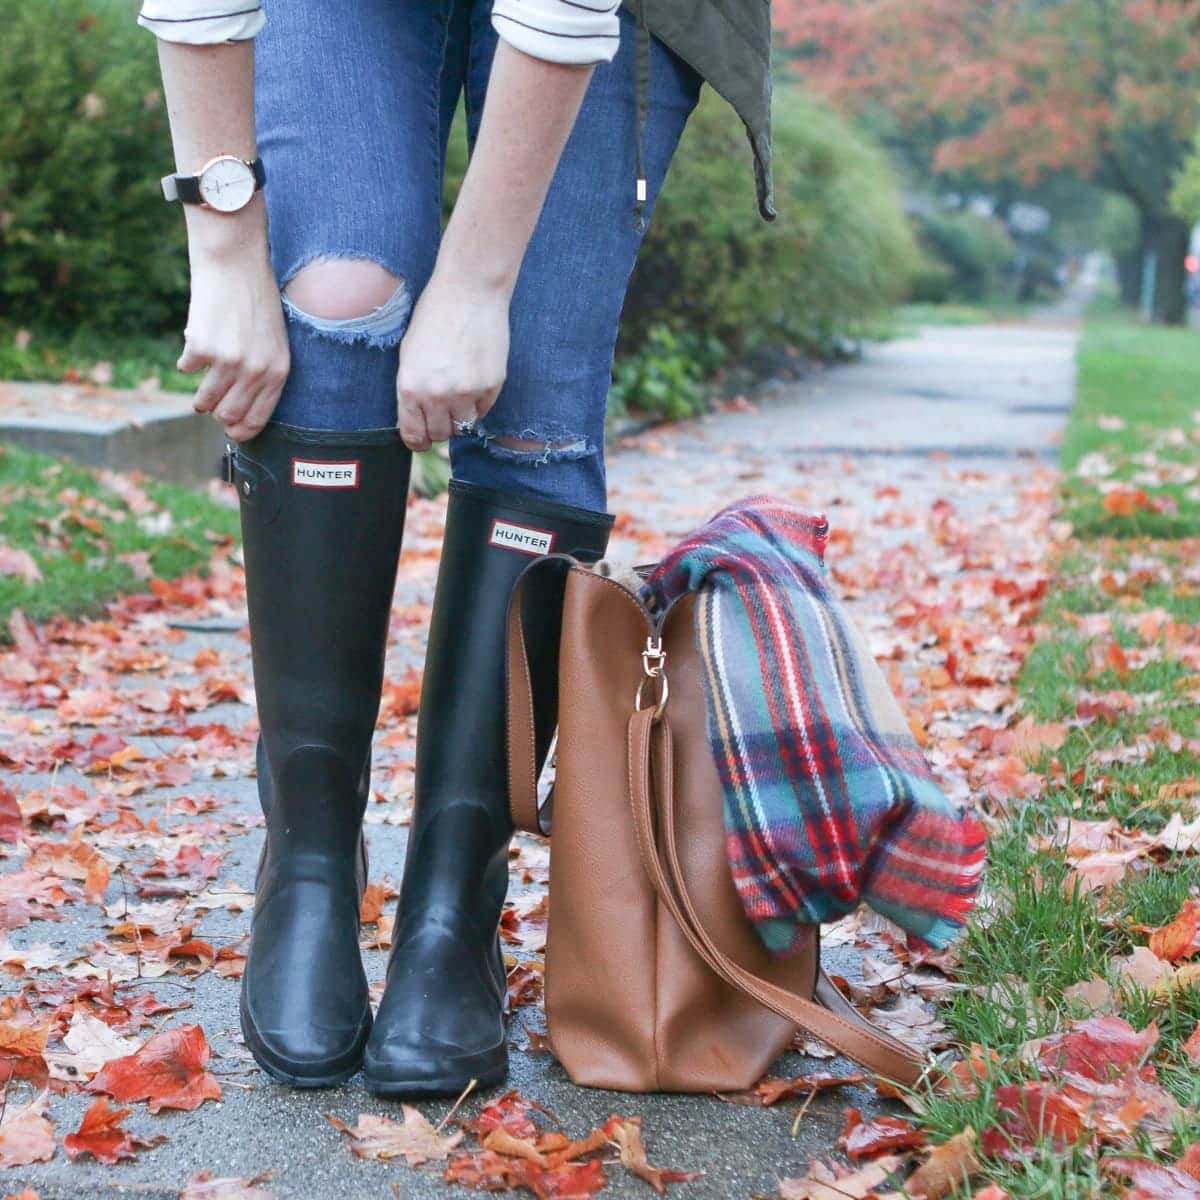 It's happy hour! We're going to chat with you about some things we love about this month. It's fall! The leaves are changing colors so we're busting out the boots and flannel. 